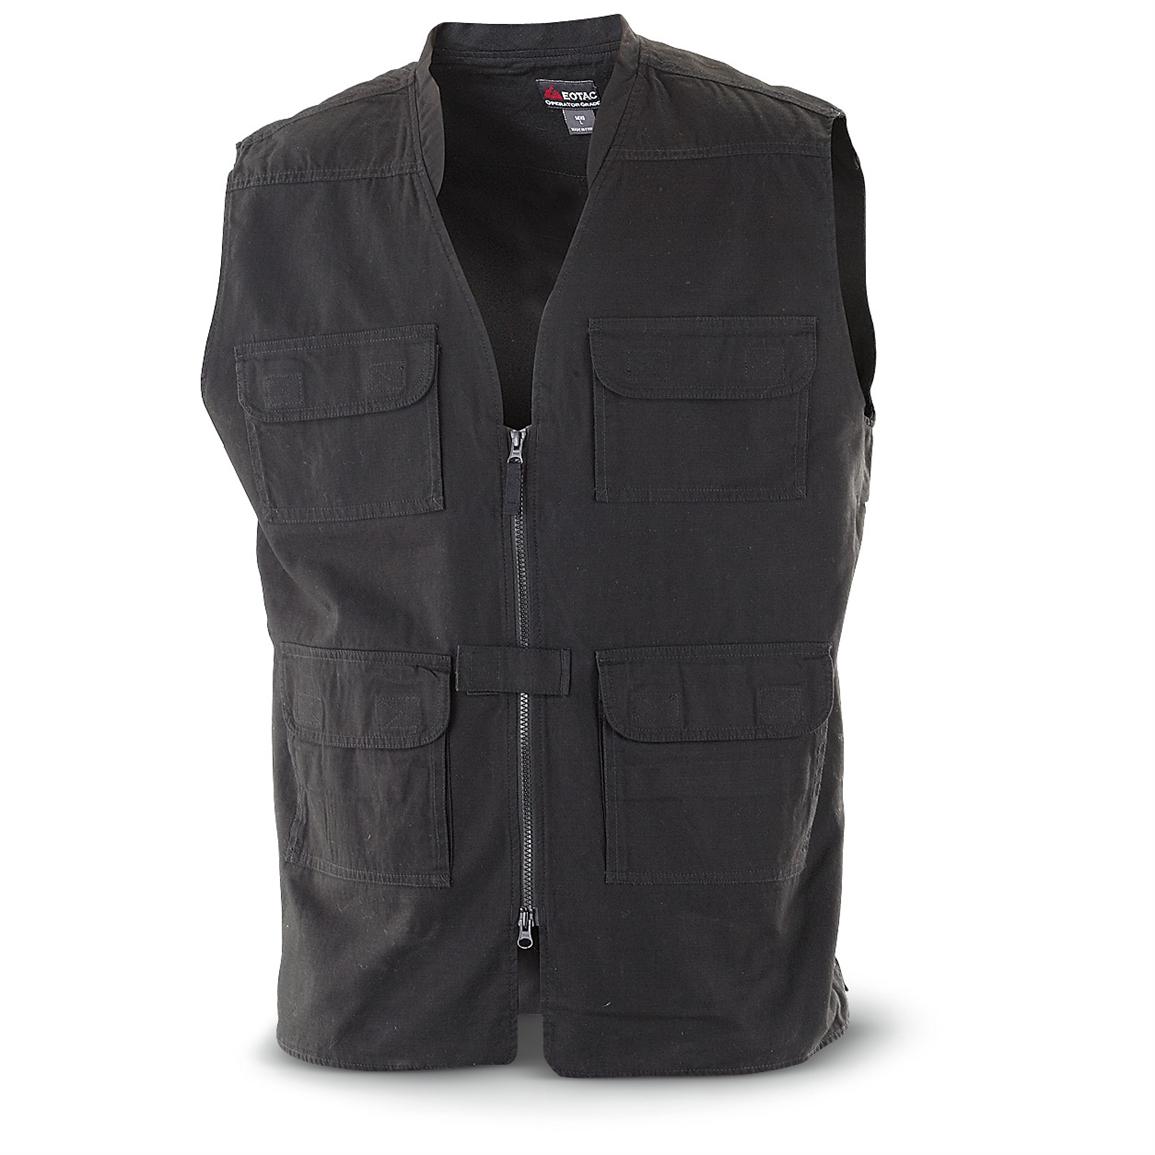 EOTAC™ Lightweight Tactical Vest - 204207, Tactical Clothing at ...